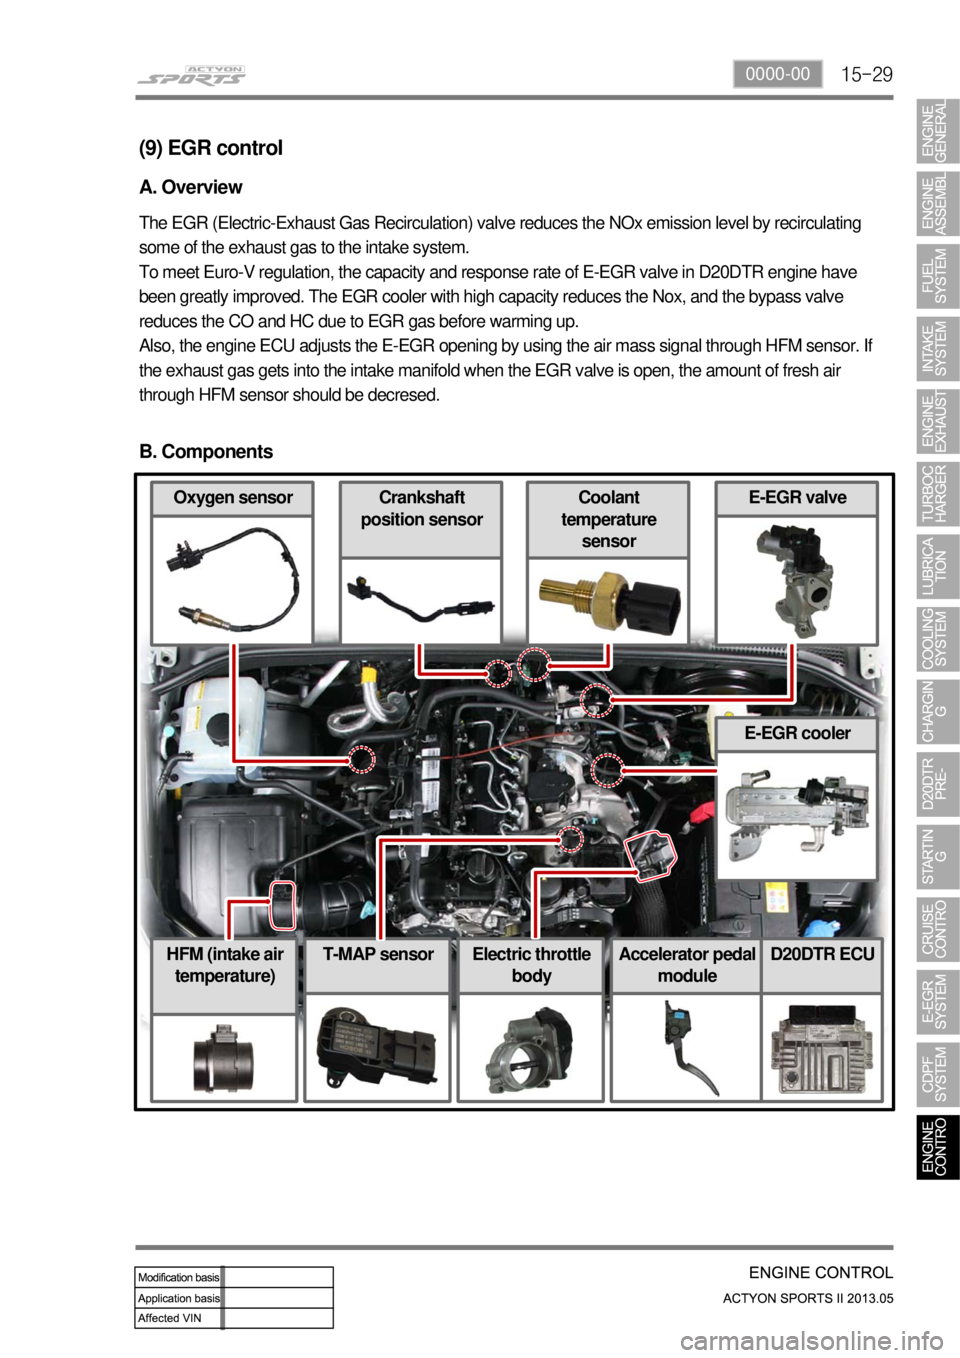 SSANGYONG NEW ACTYON SPORTS 2013  Service Manual 15-290000-00
(9) EGR control
A. Overview
The EGR (Electric-Exhaust Gas Recirculation) valve reduces the NOx emission level by recirculating 
some of the exhaust gas to the intake system.
To meet Euro-